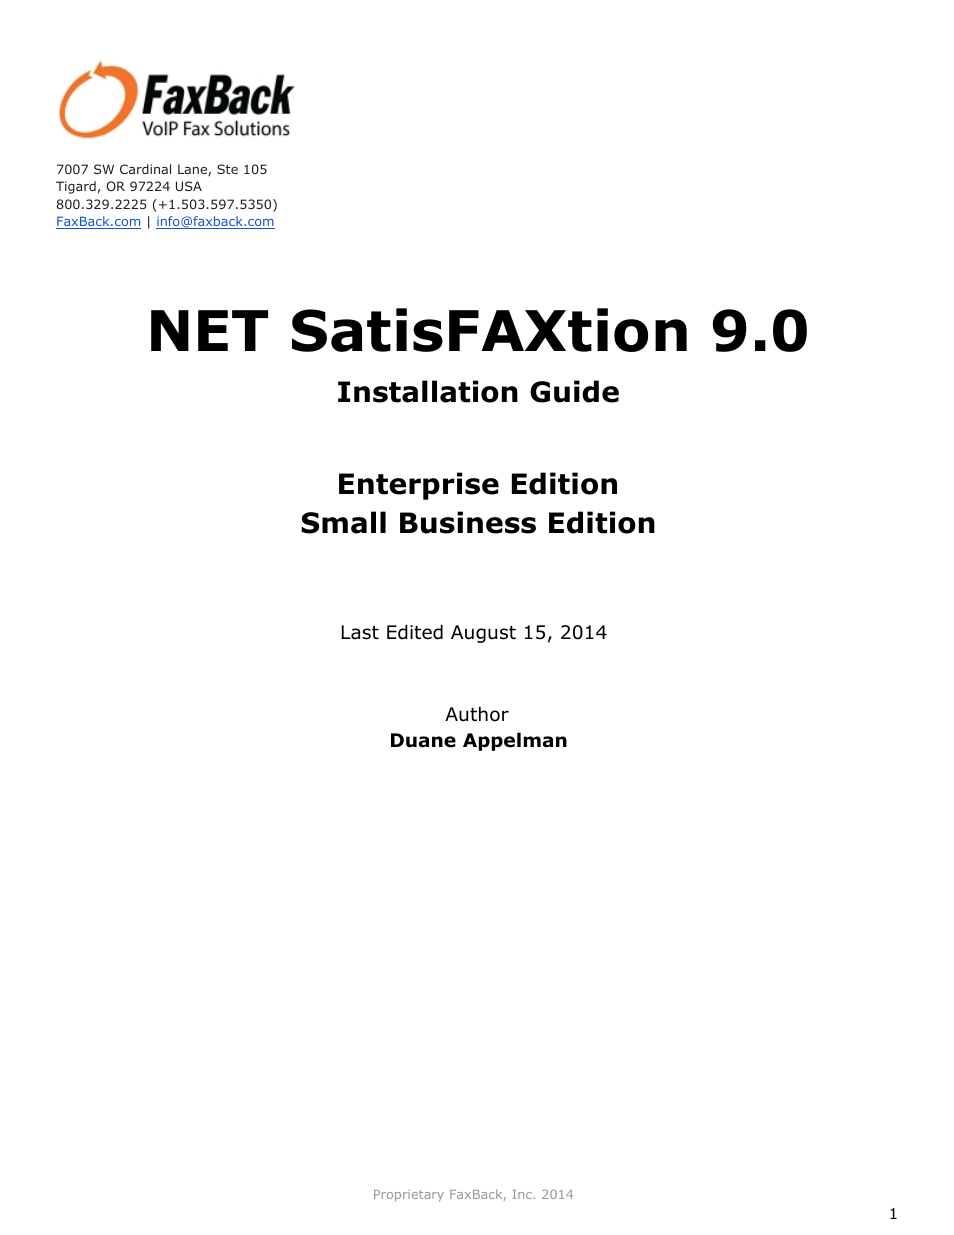 NET SatisFAXtion 9.0 - Installation Guide (Small Business Edition)